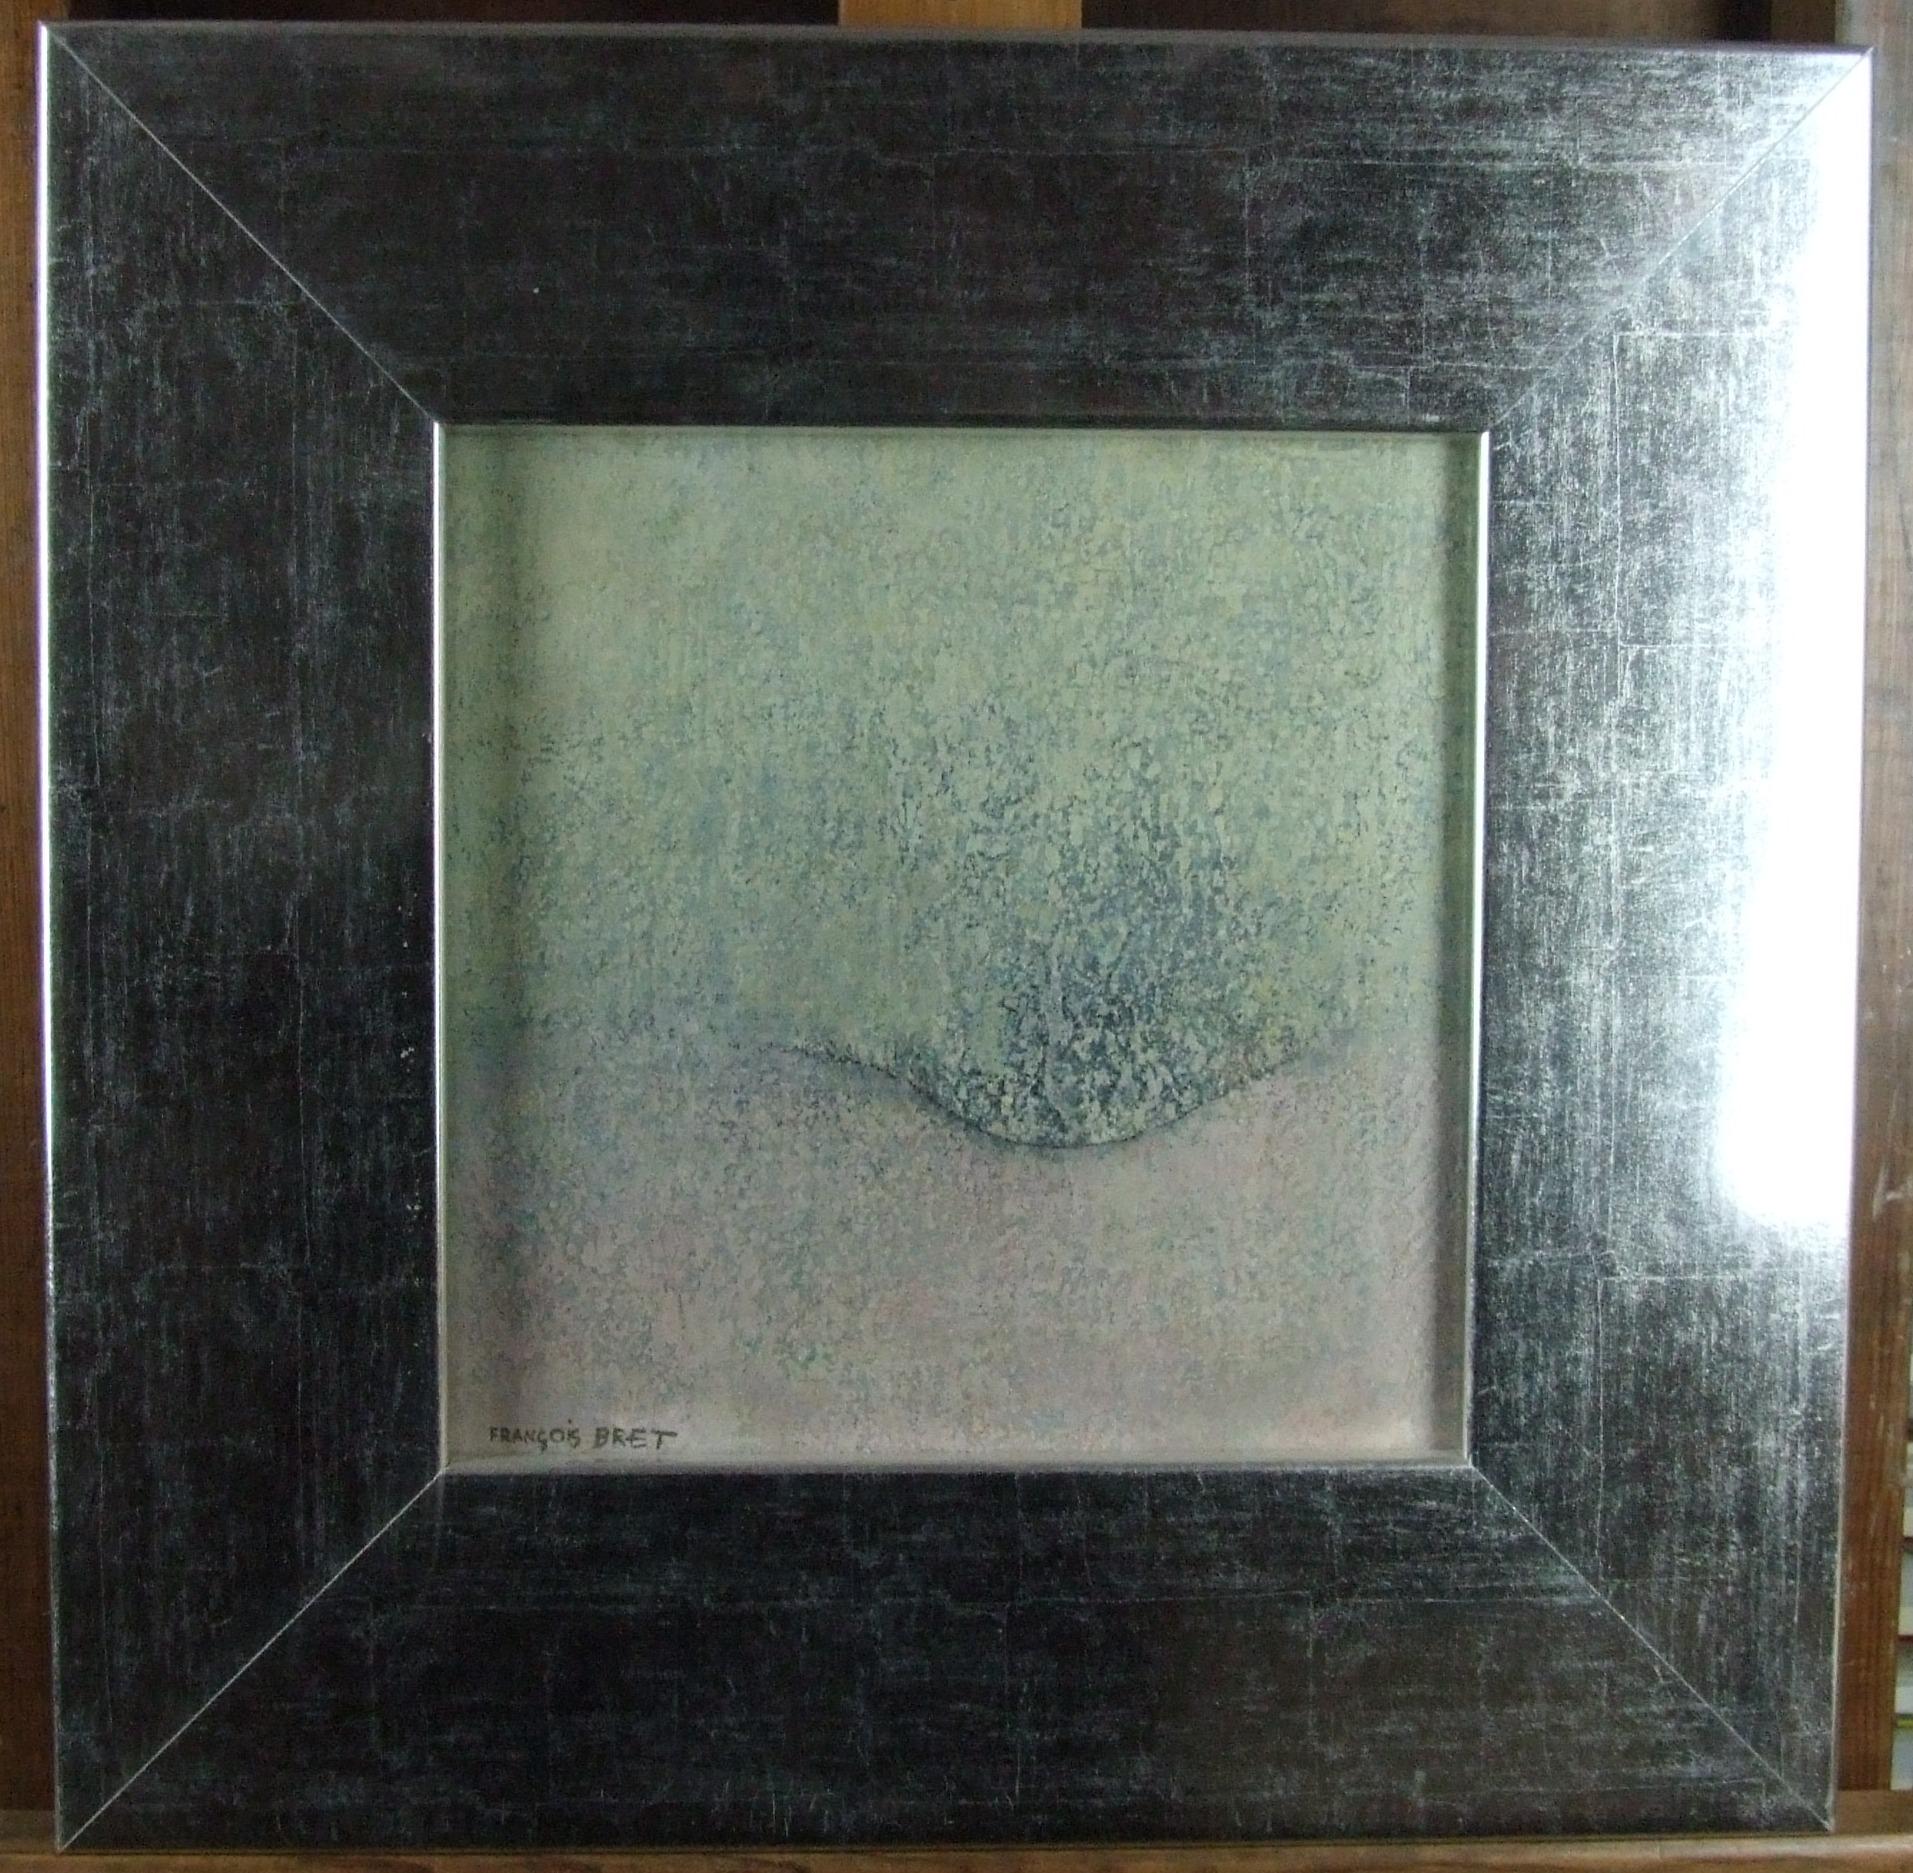 abstraction 1, '70s - Oil on canvas, 30x30 cm, framed. - Painting by Francois Bret